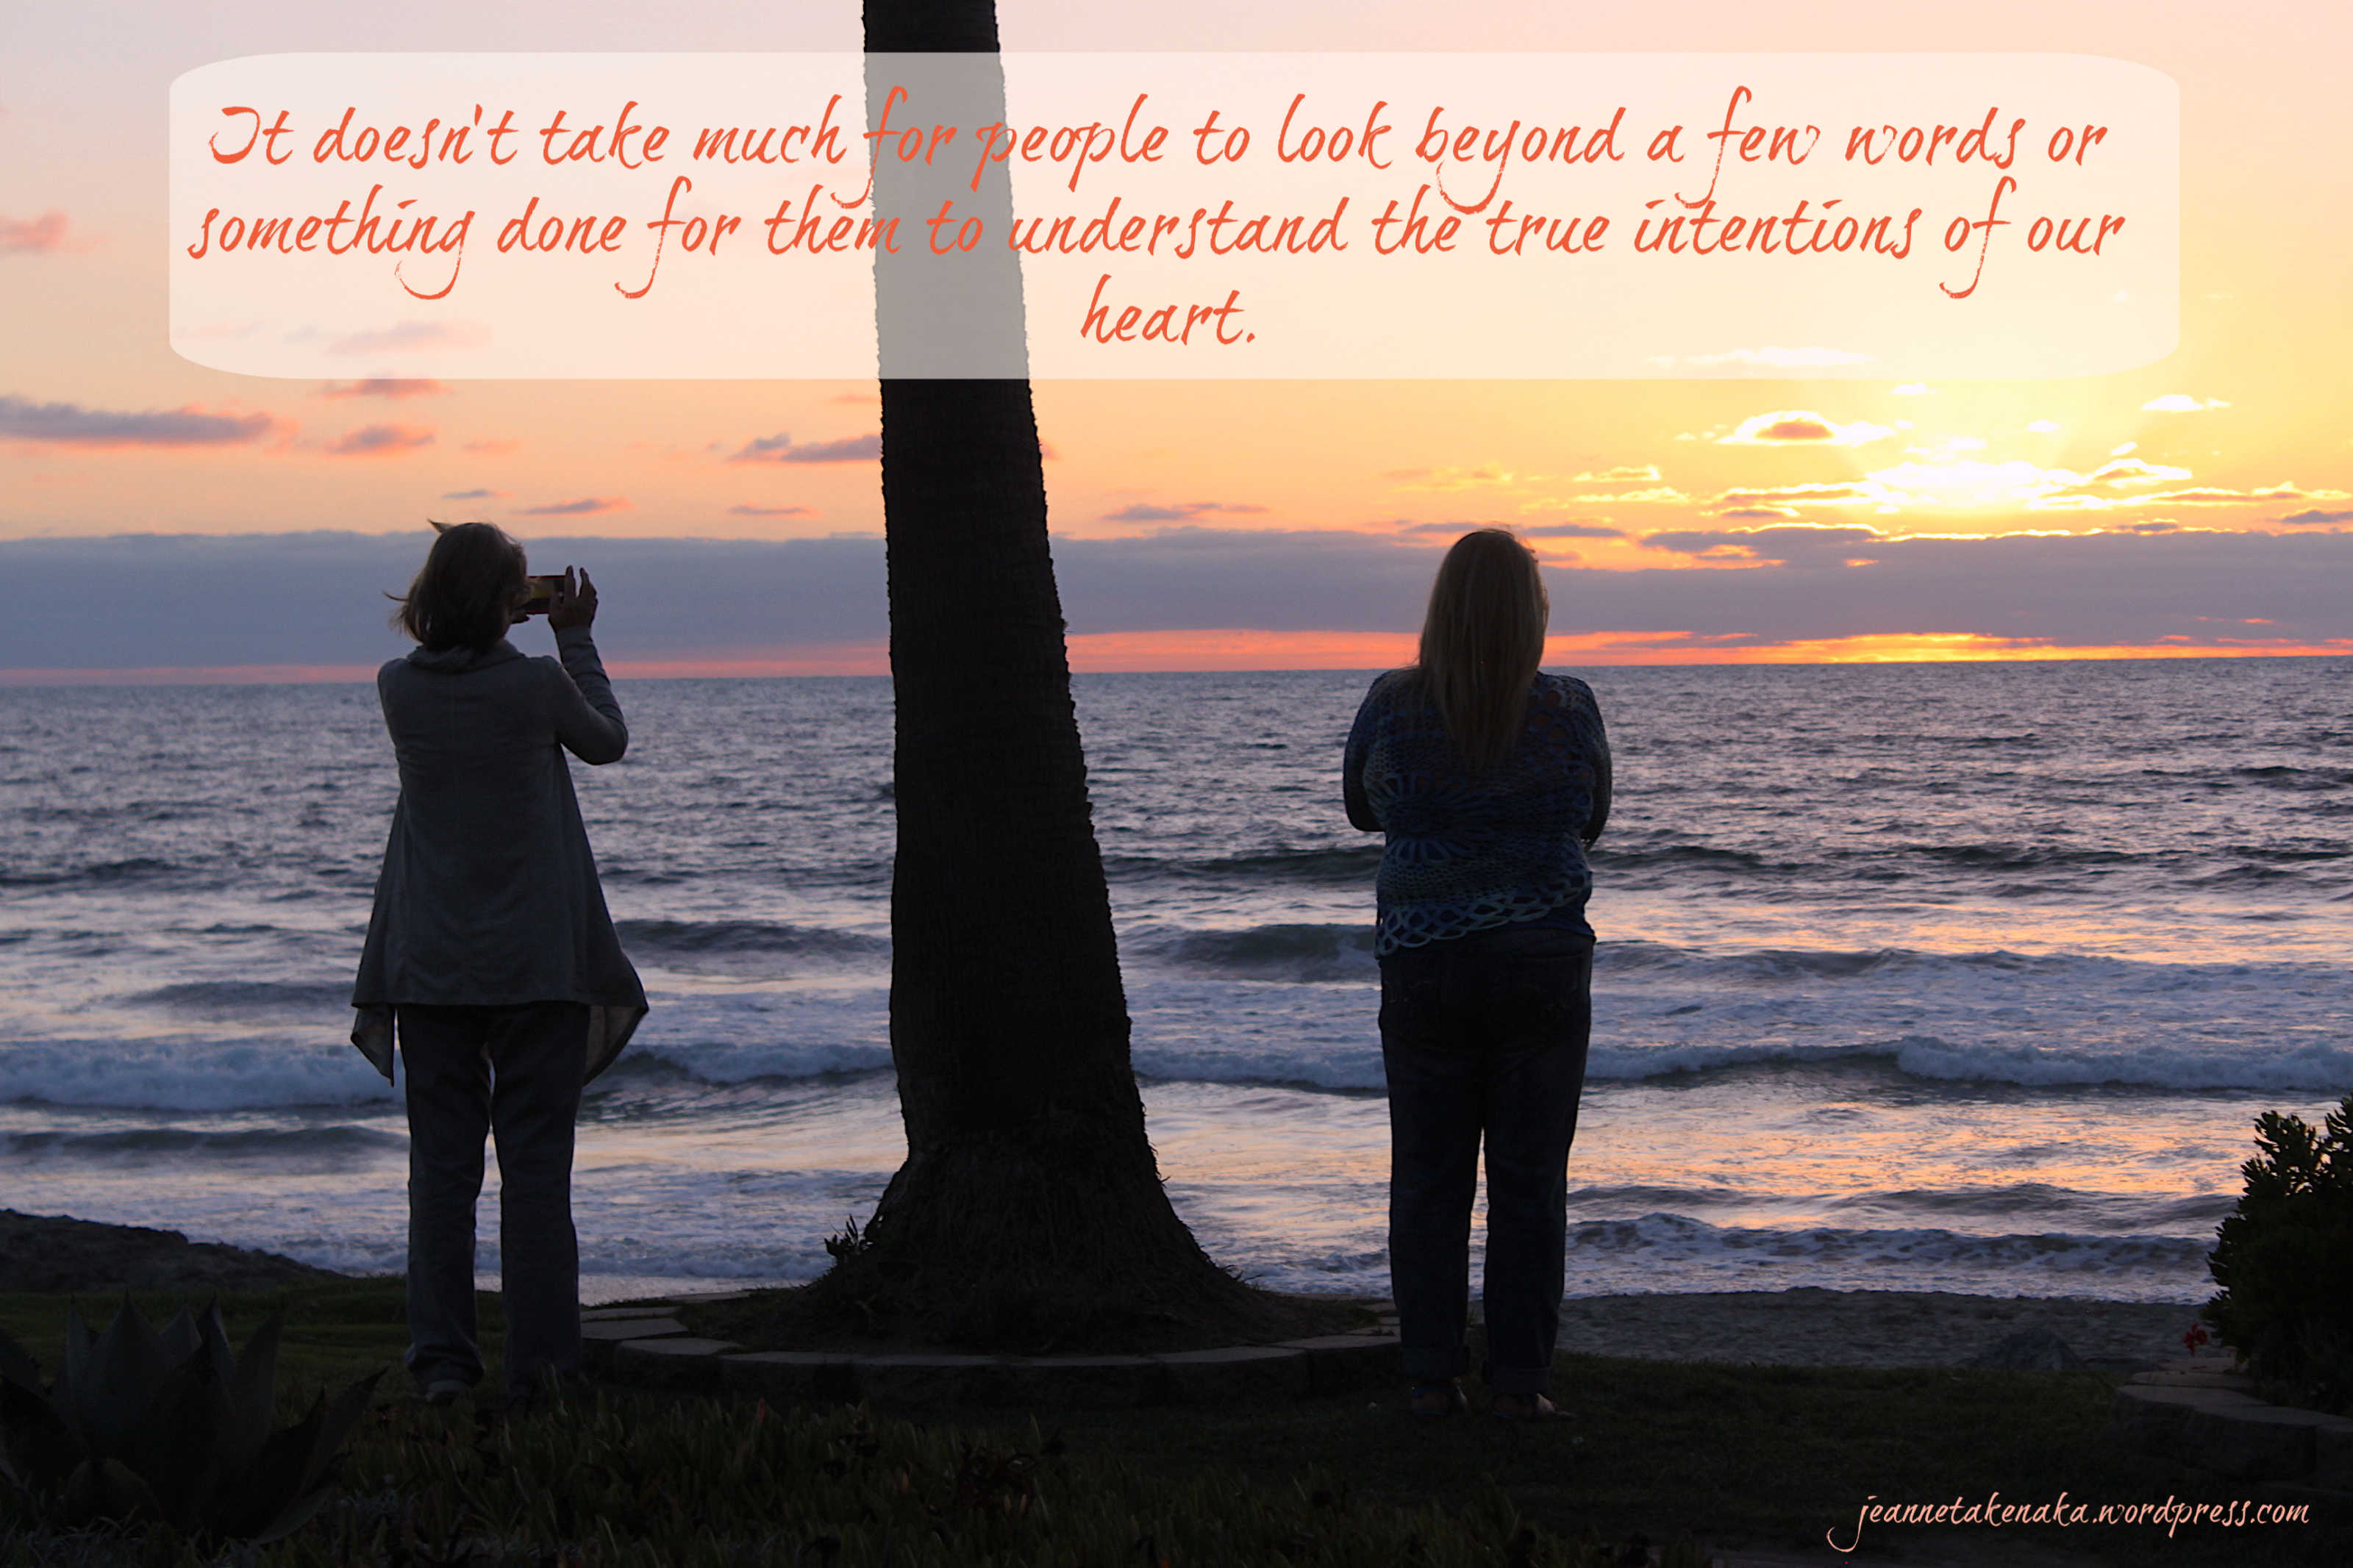 Meme with two women facing the ocean at sunset...says "It doesn't take much for people to look beyond a few words or something done for them to understand the true intentions of our heart."